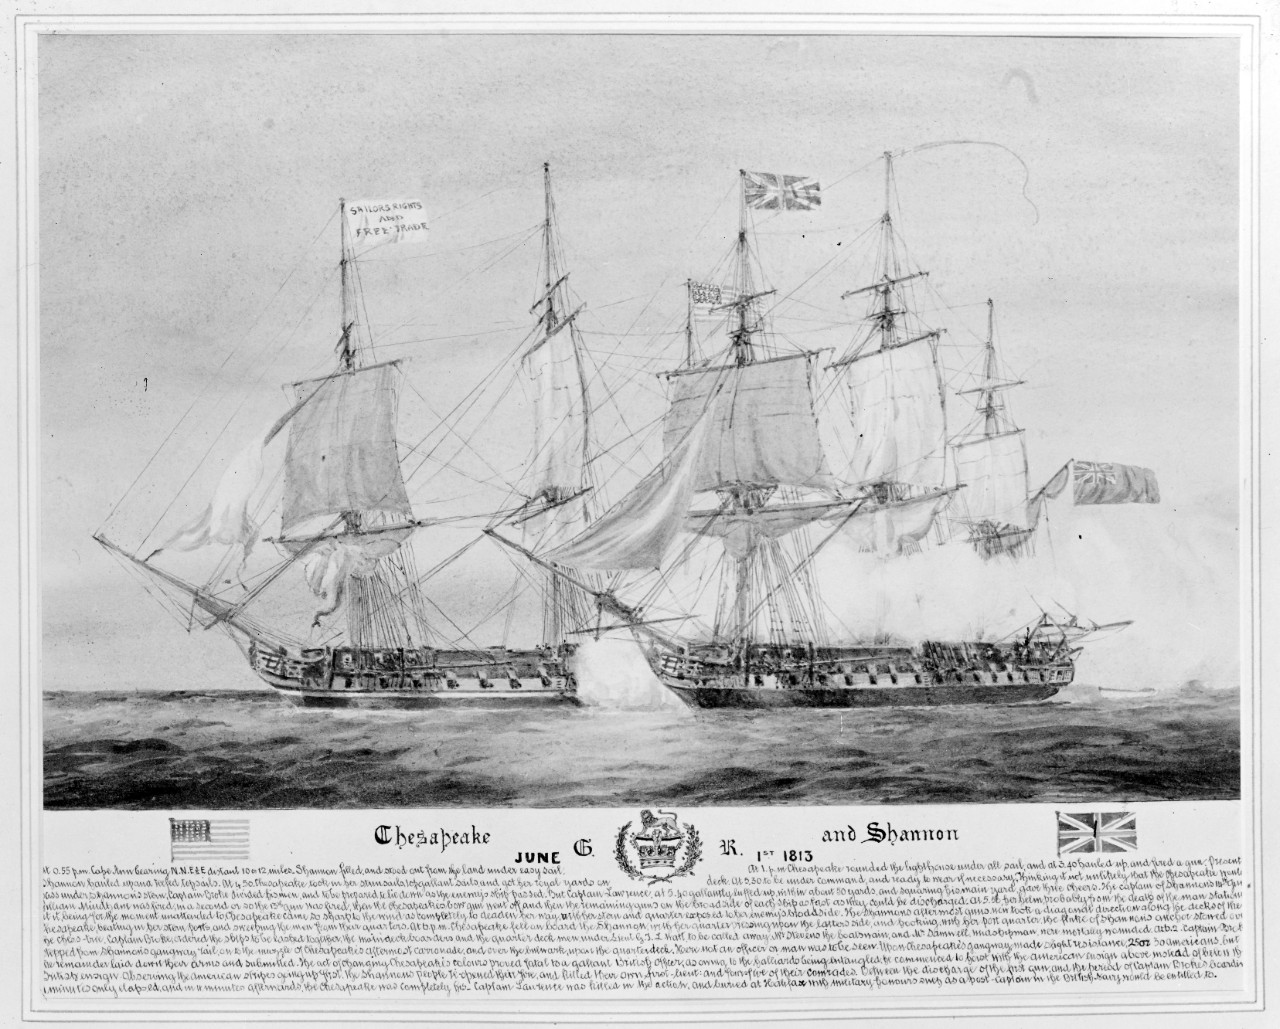 Photo #: NH 42907  Action between USS Chesapeake and HMS Shannon, 1 June 1813